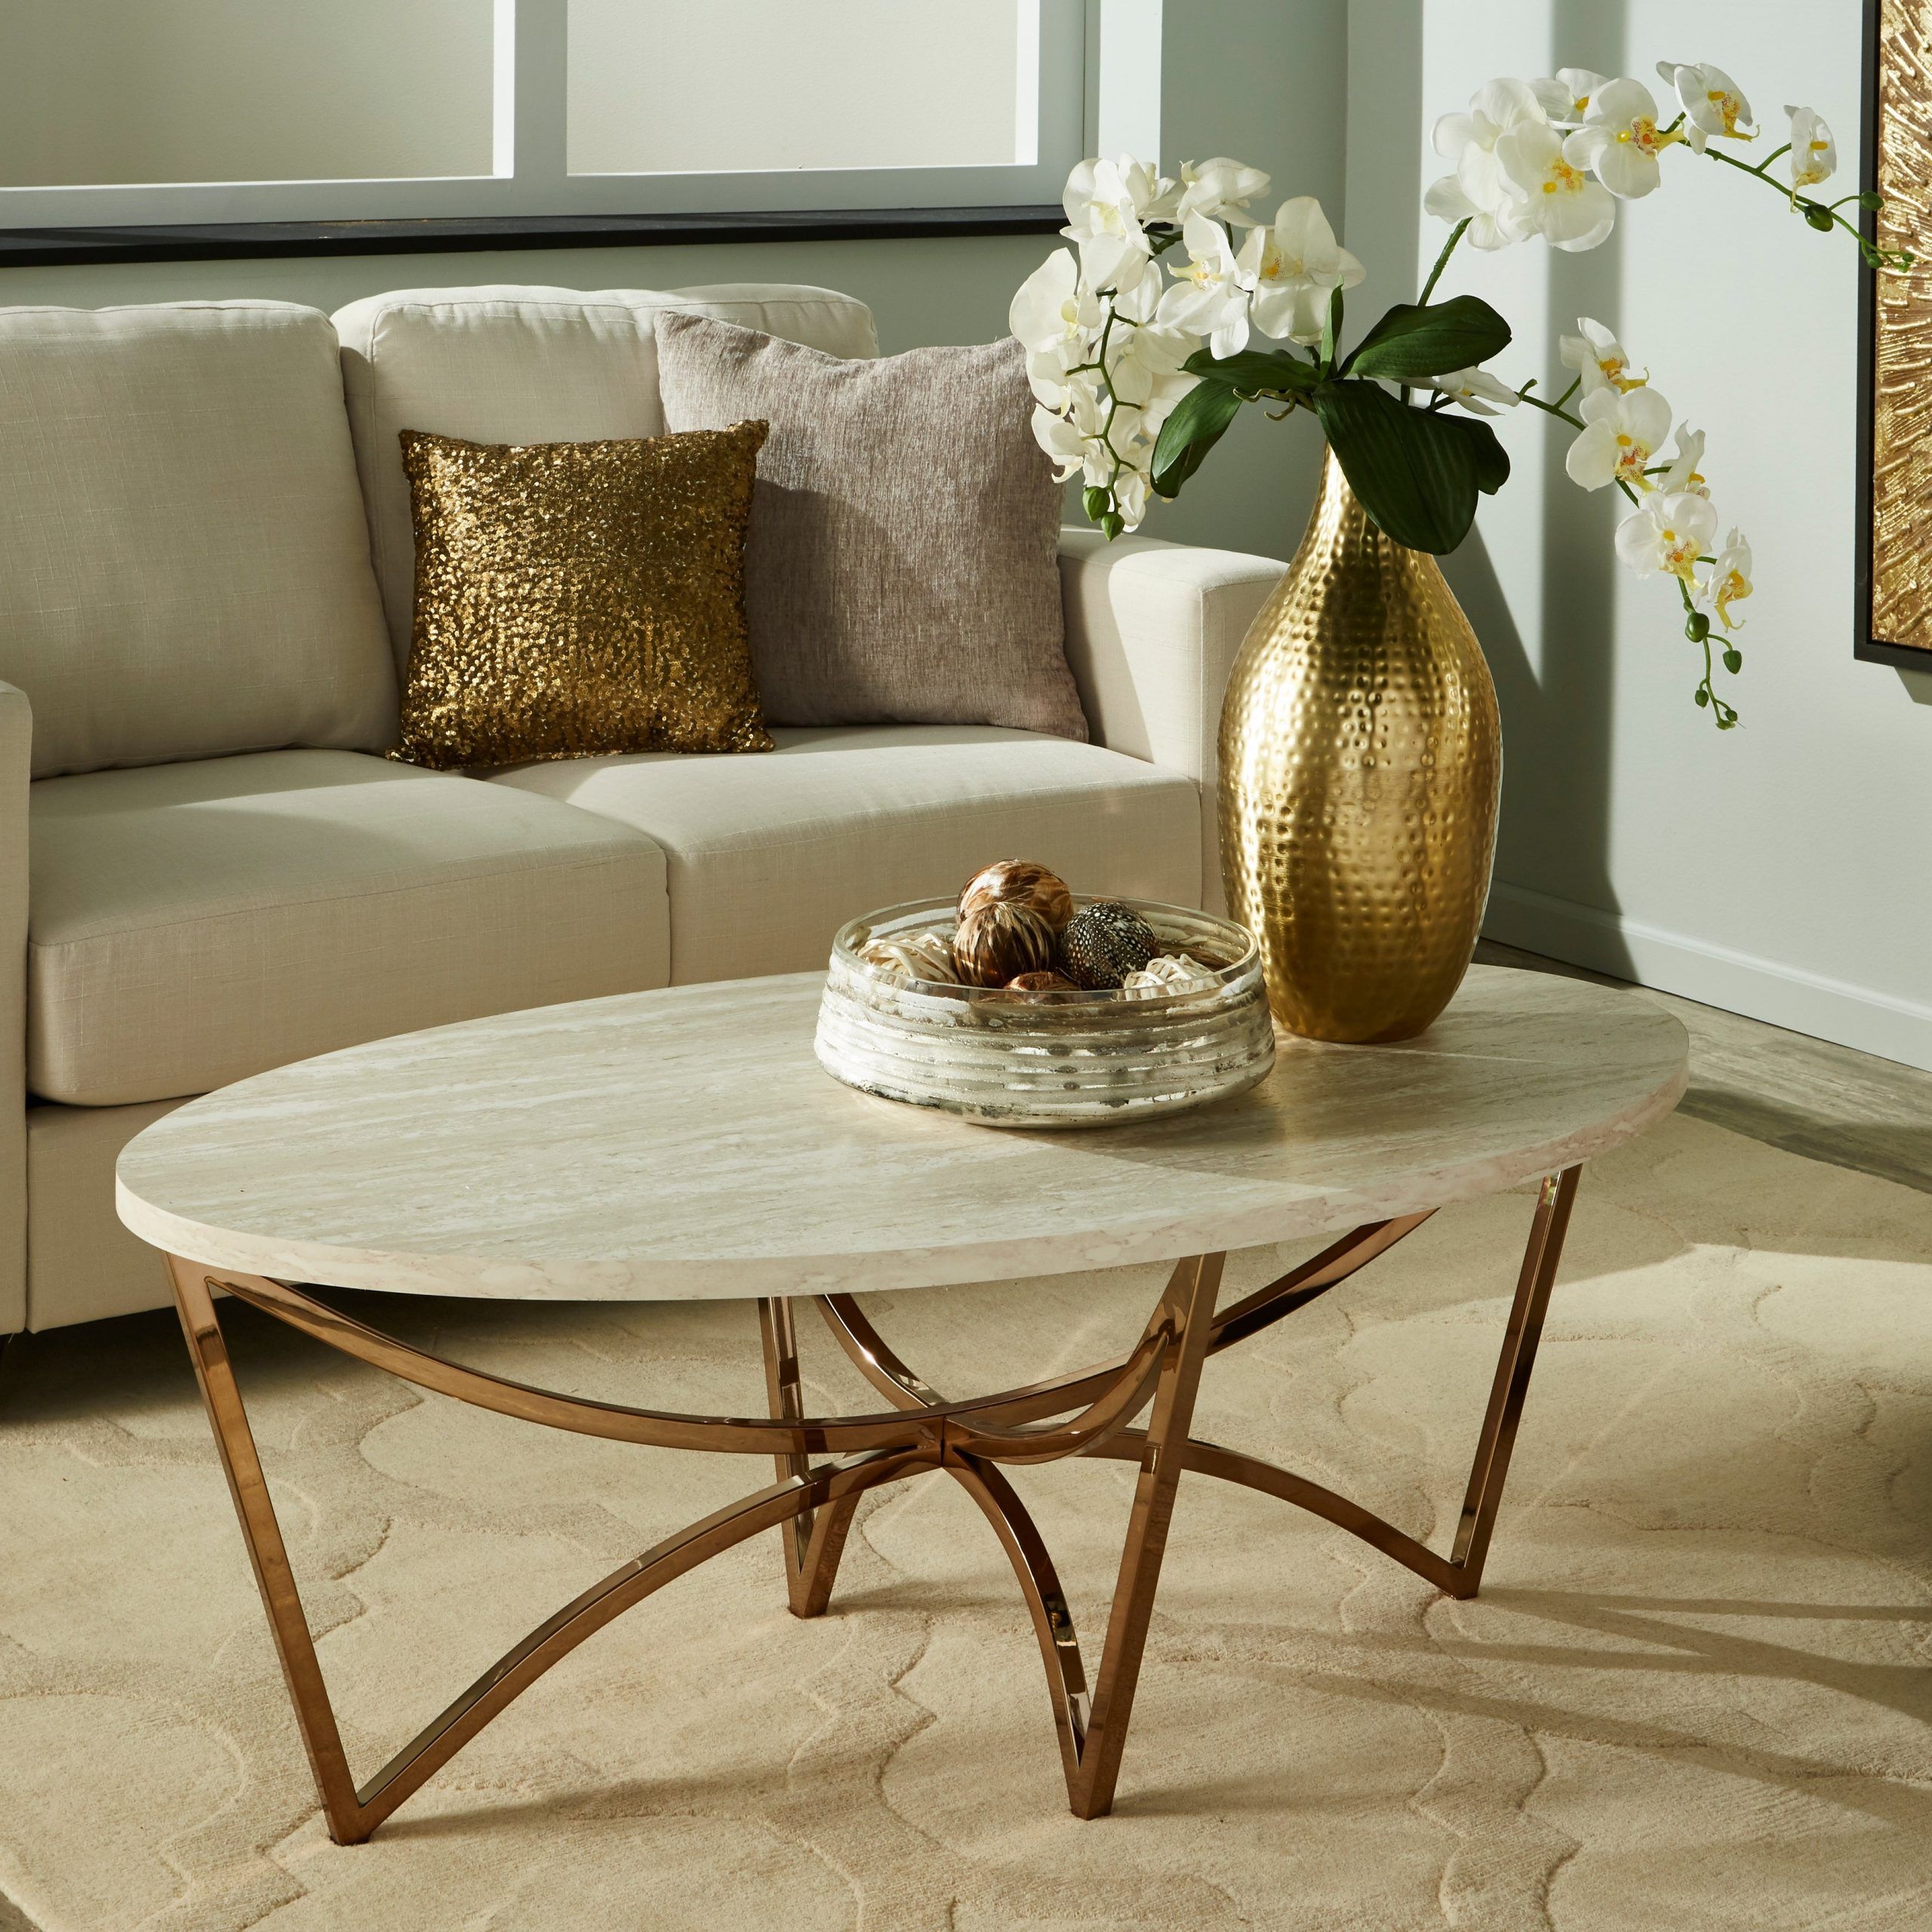 Gold Cocktail Tables With Favorite Gottlieb Round Glass Gold Coffee Table / Vittoria (View 8 of 20)